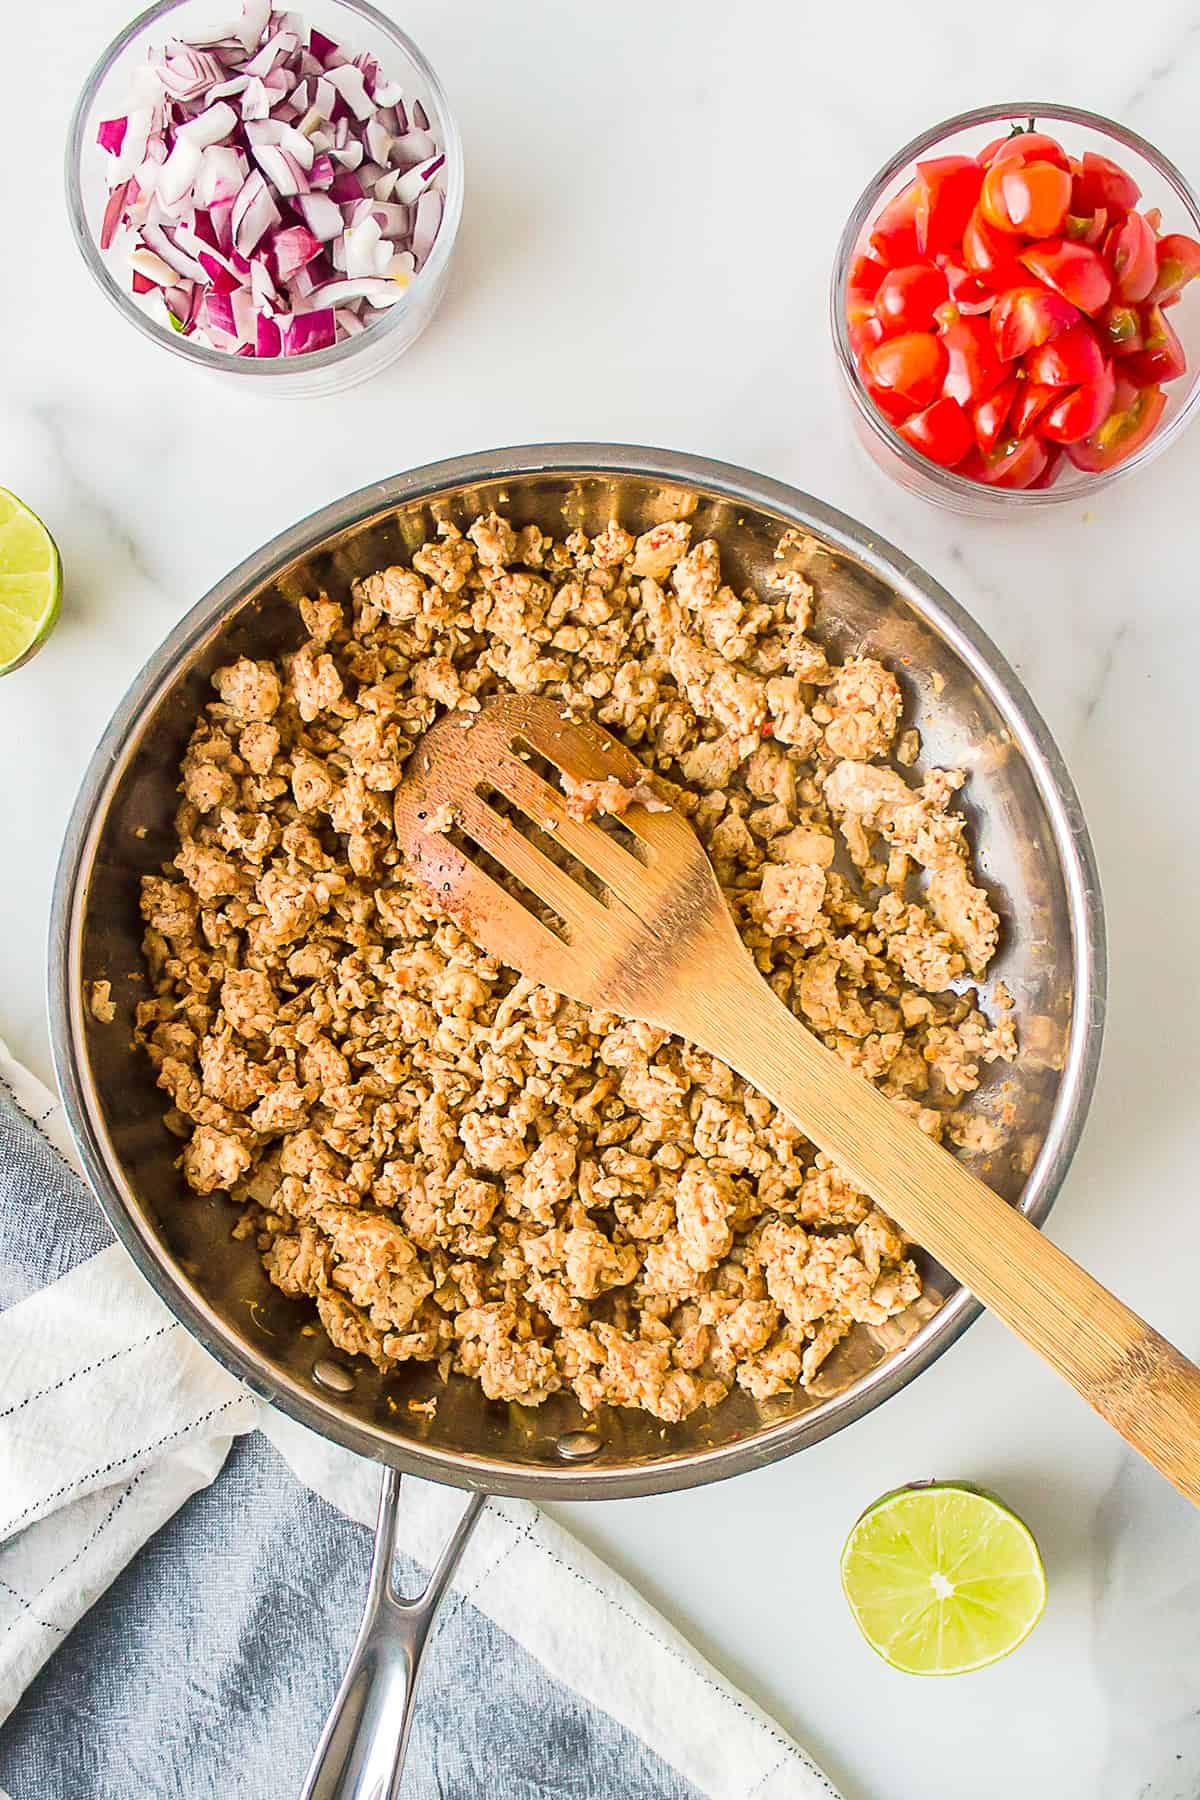 Cooked, seasoned ground turkey in a skillet.